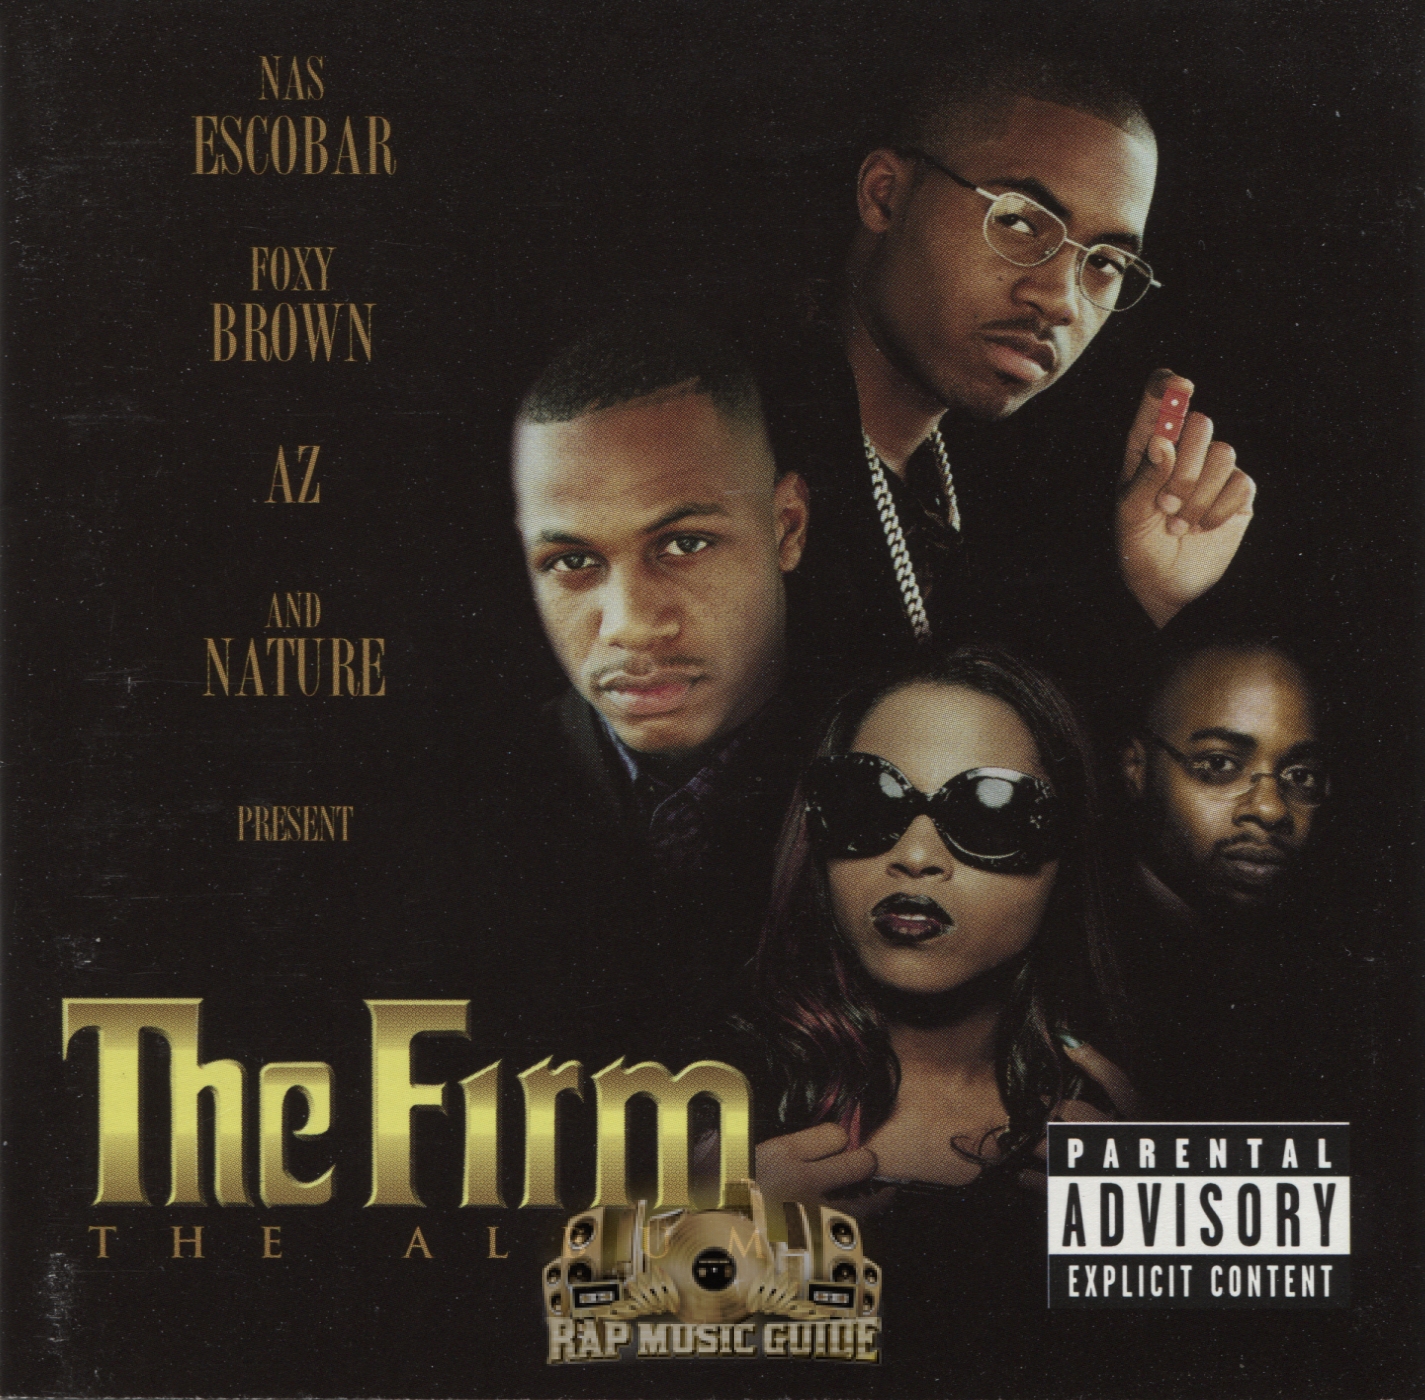 The Firm - The Album: CD